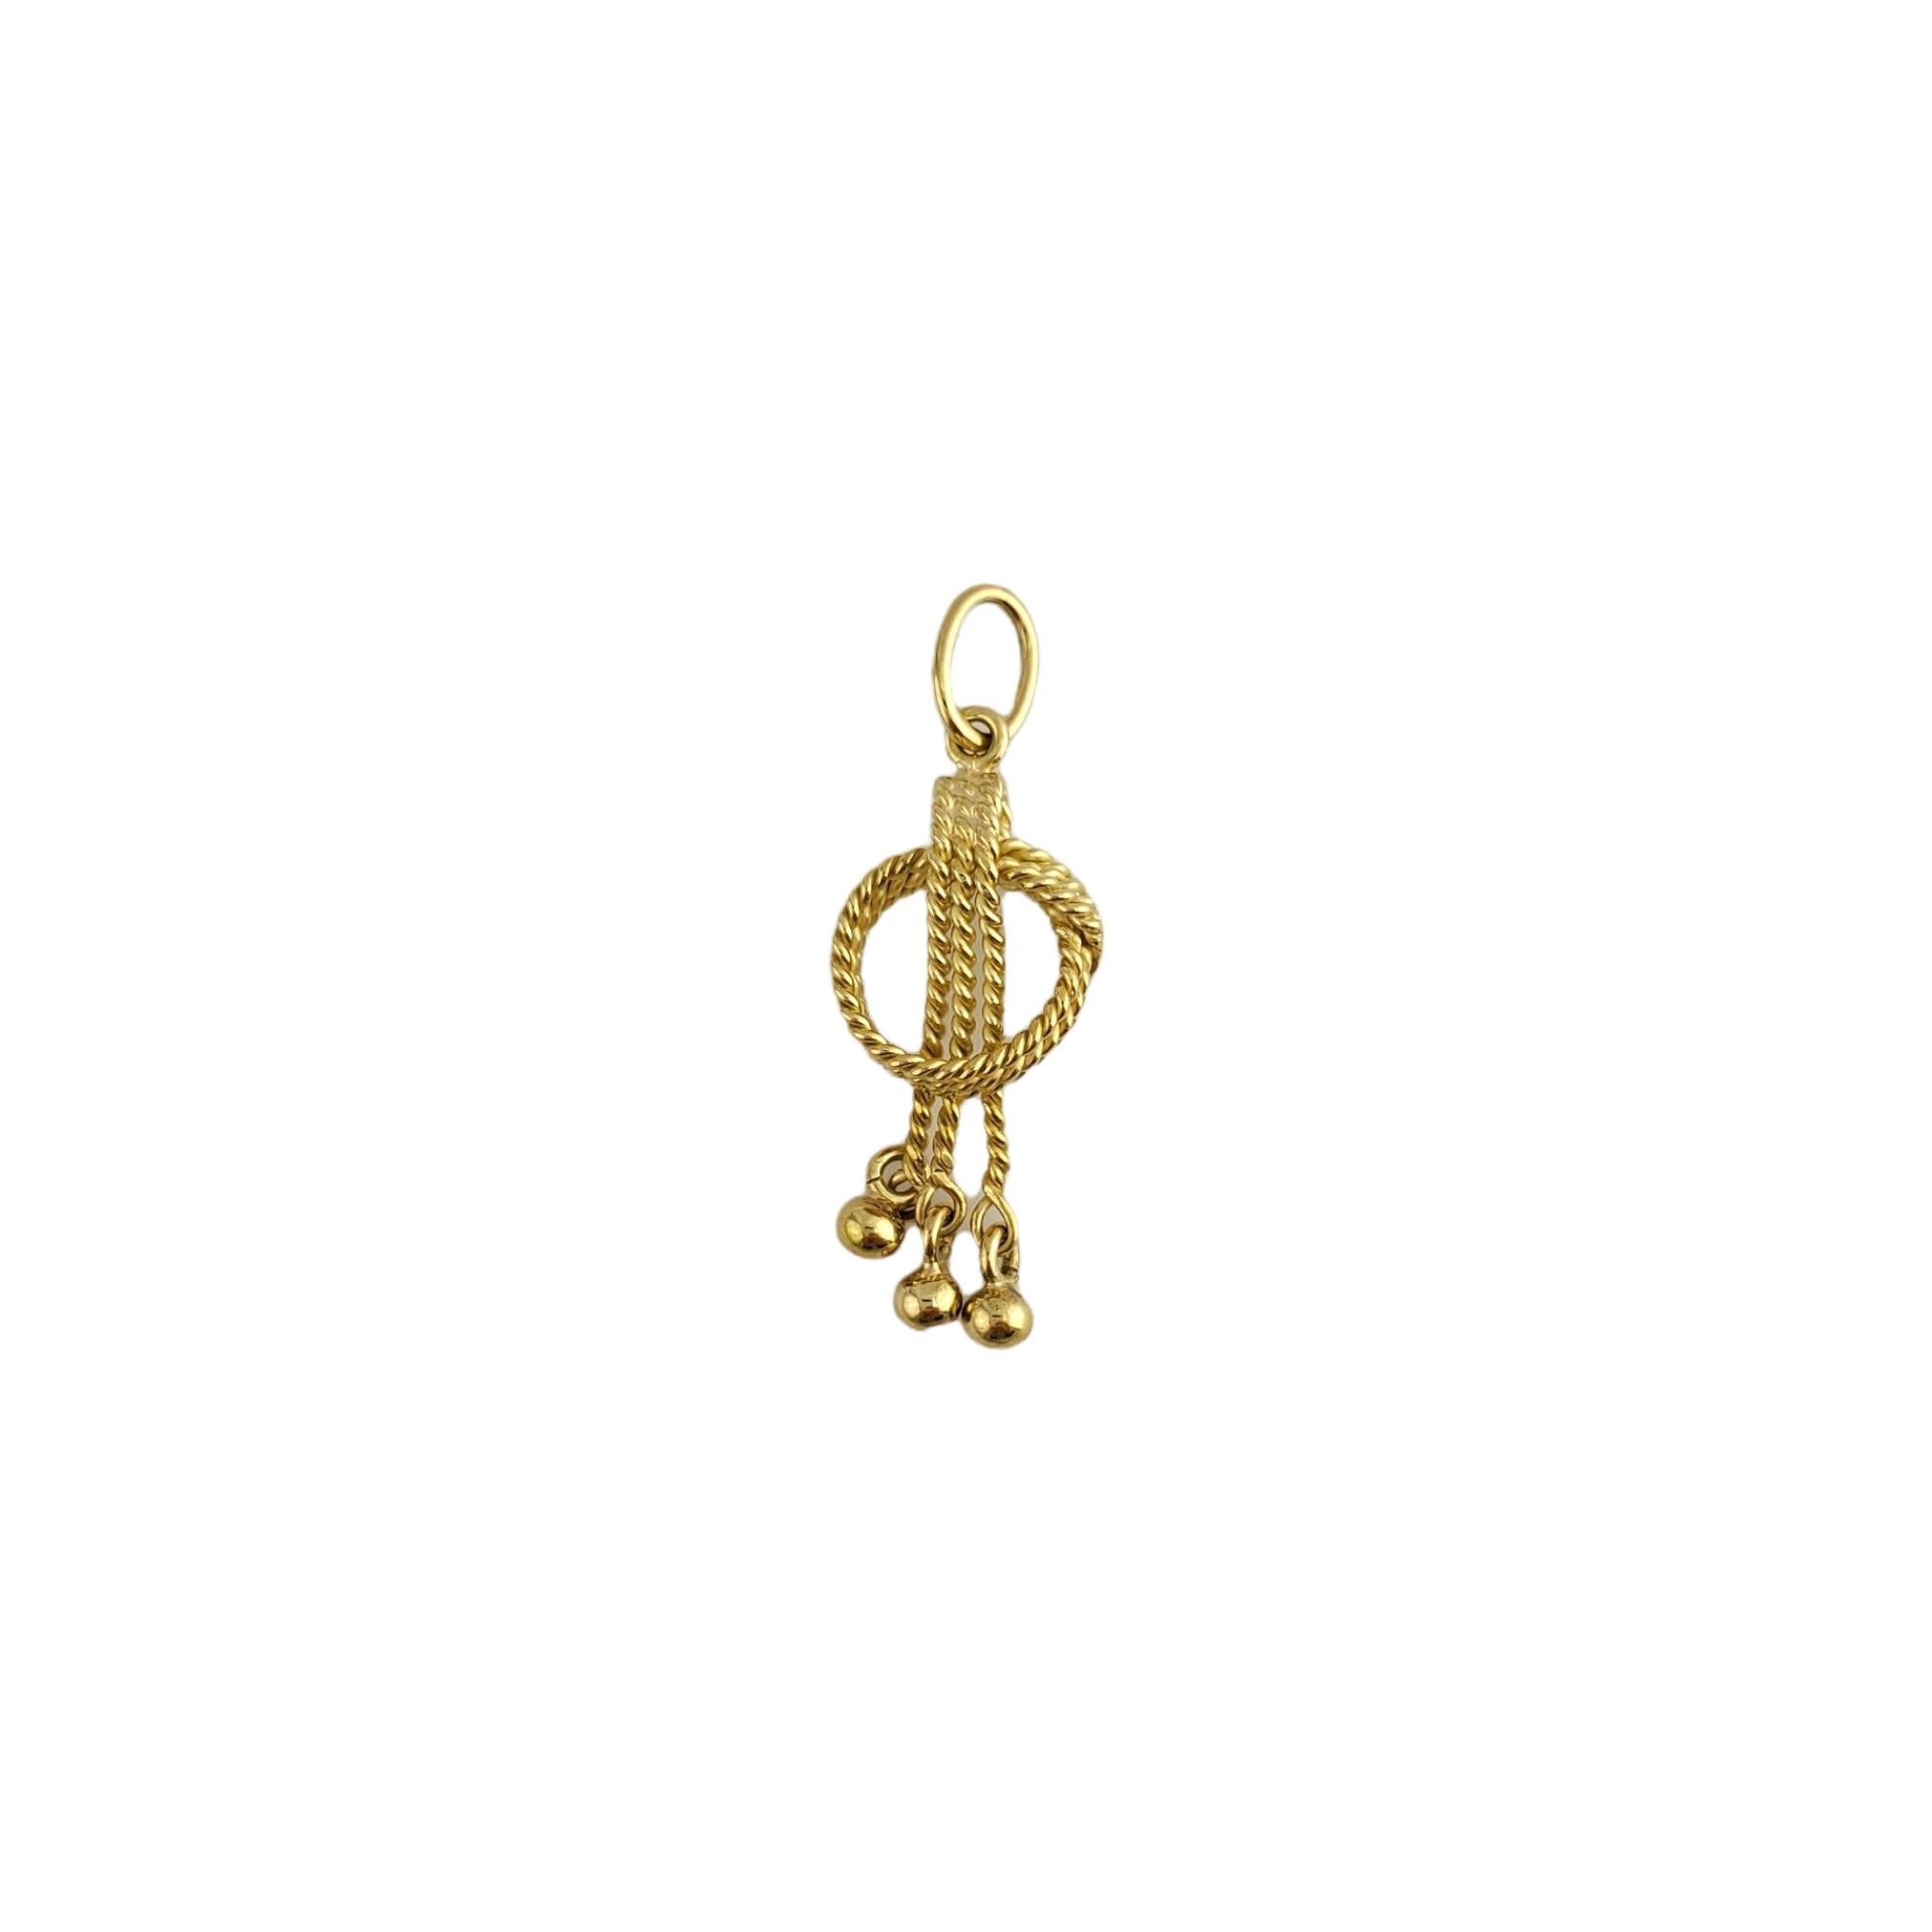 Beautiful 18K yellow gold horse rope charm!

Size: 11.39mm X 24.95mm

Weight:  2.7gr /  1.7dwt

Very good condition, professionally polished.

Will come packaged in a gift box and will be shipped U.S. Priority Mail Insured.

AK5/6/22/17KCS